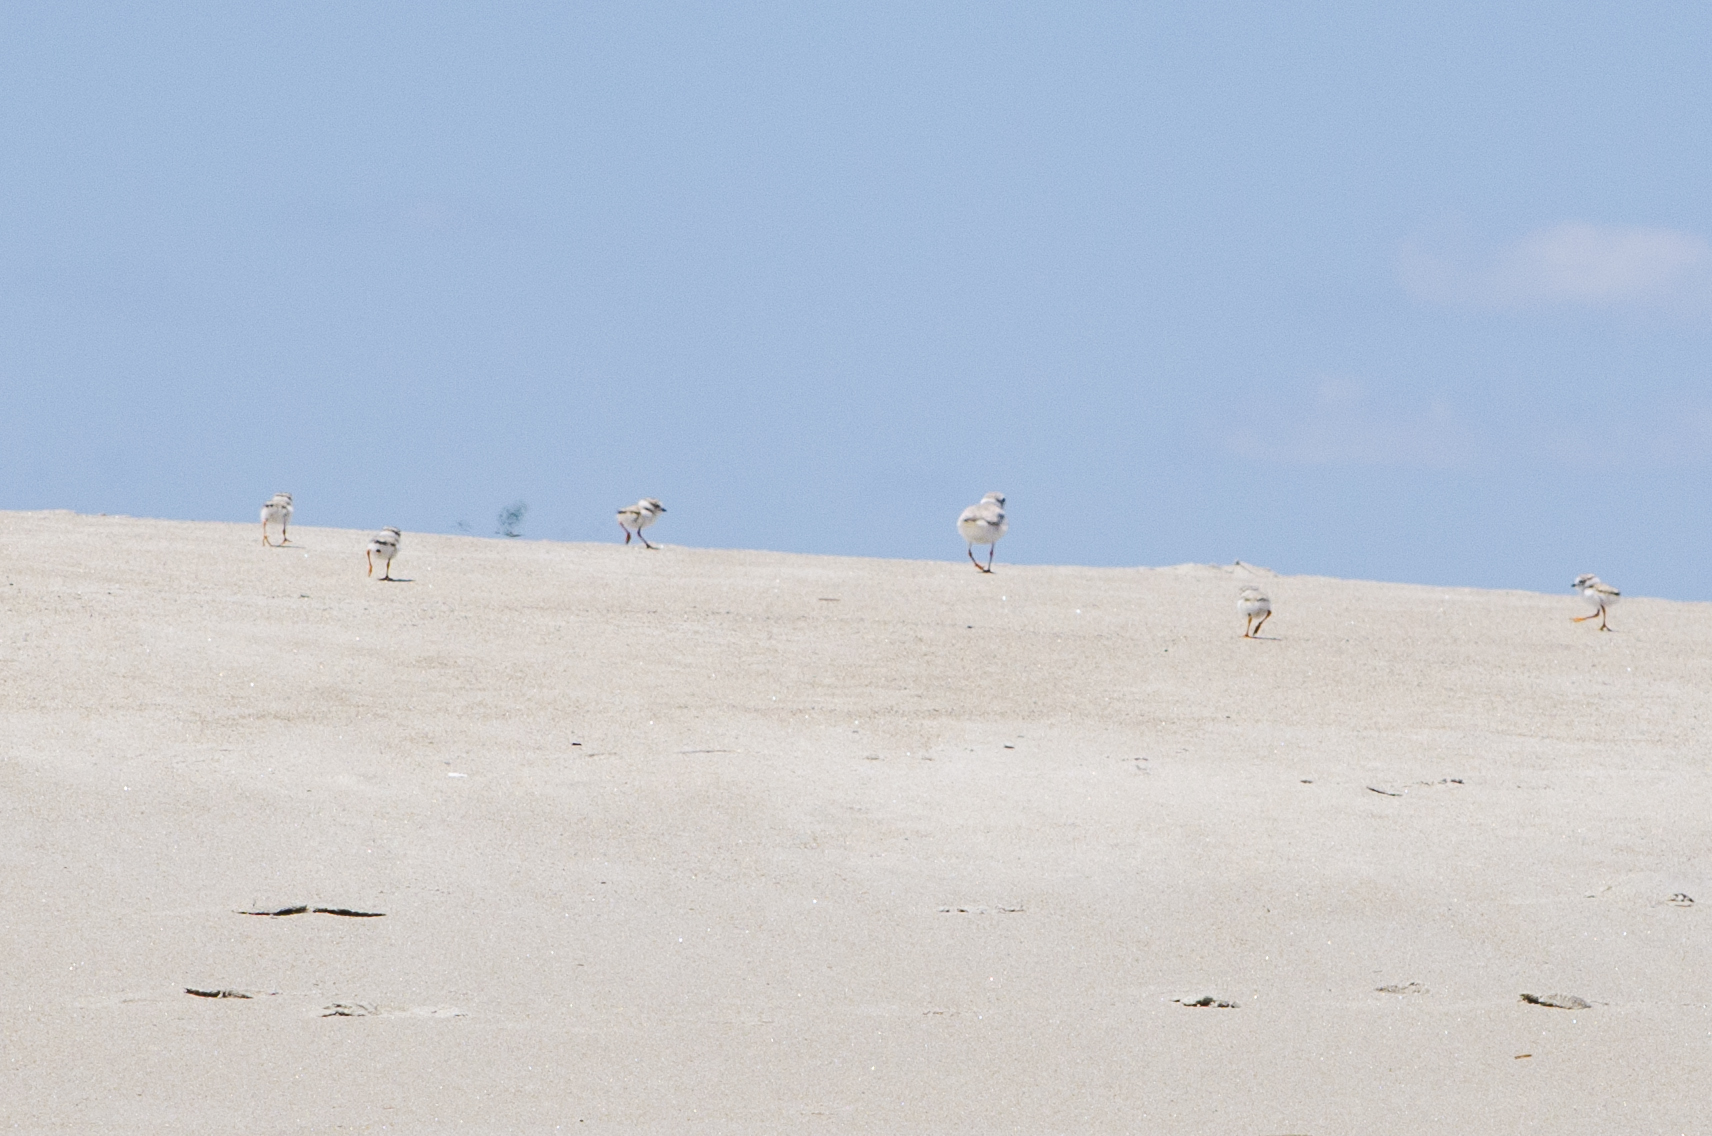 A Piping Plover with five chicks walks across the beach